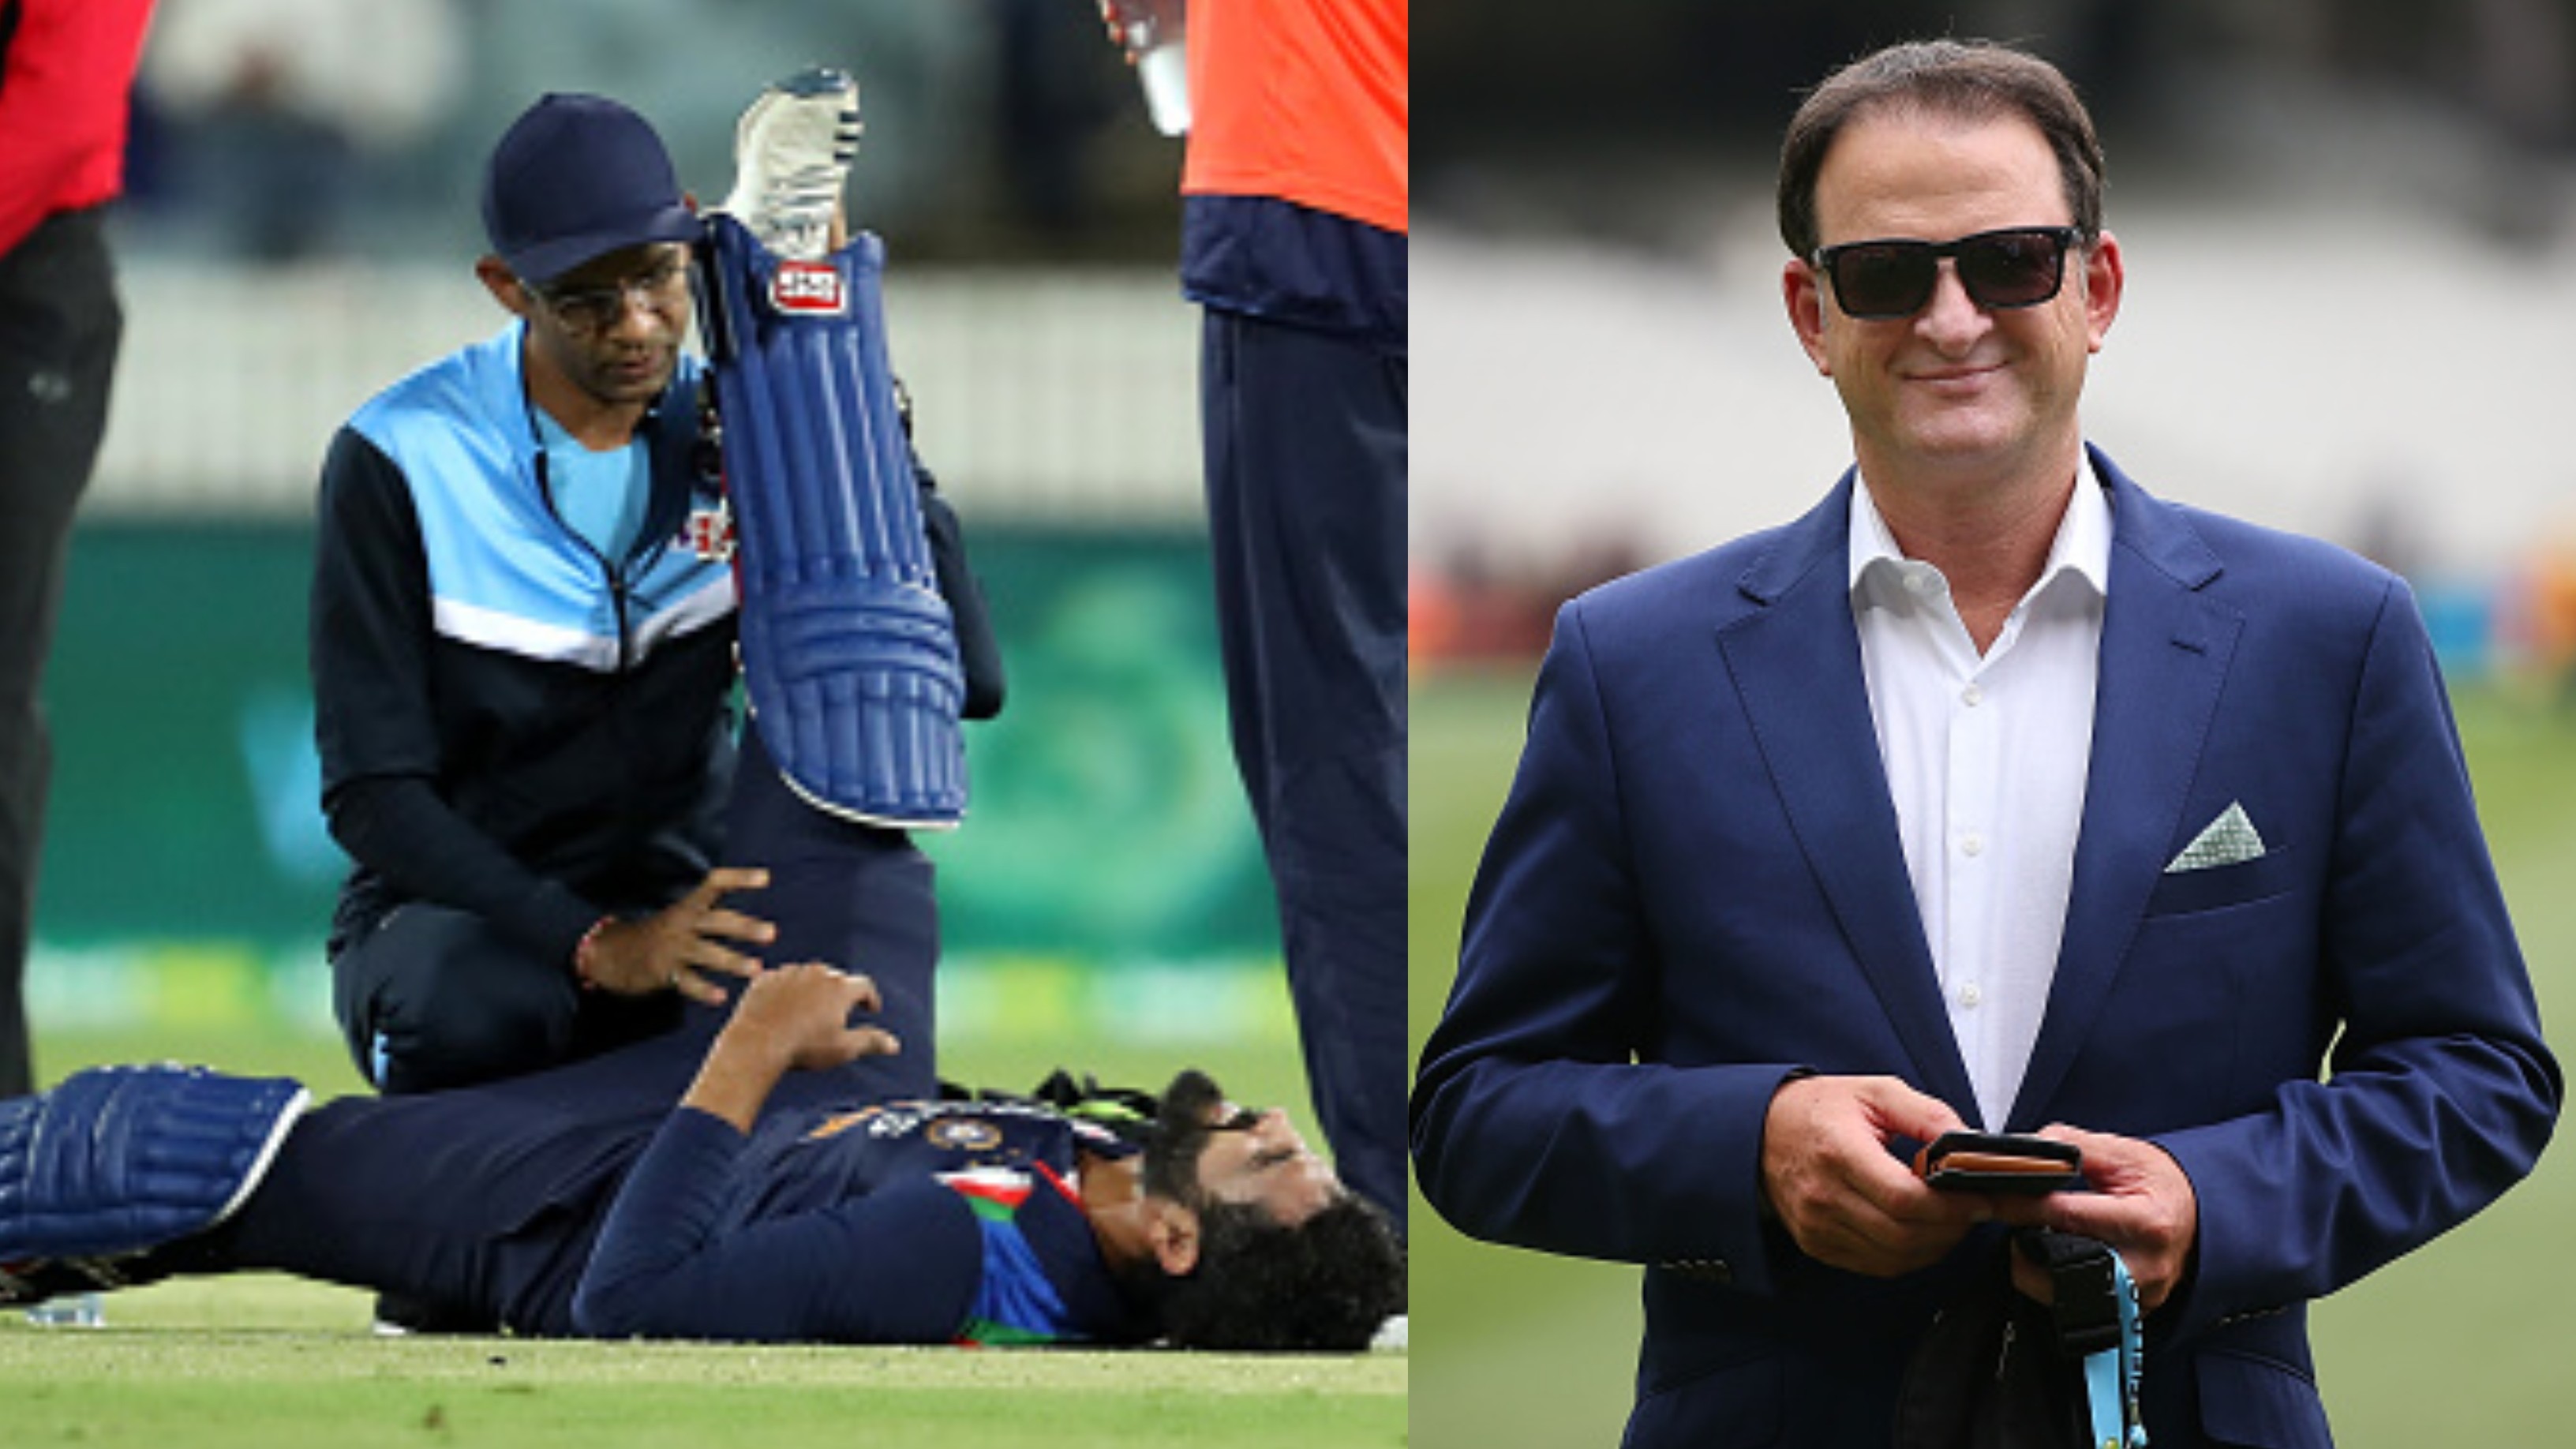 AUS v IND 2020-21: Mark Waugh suggests ICC to appoint neutral doctors to assess concussions